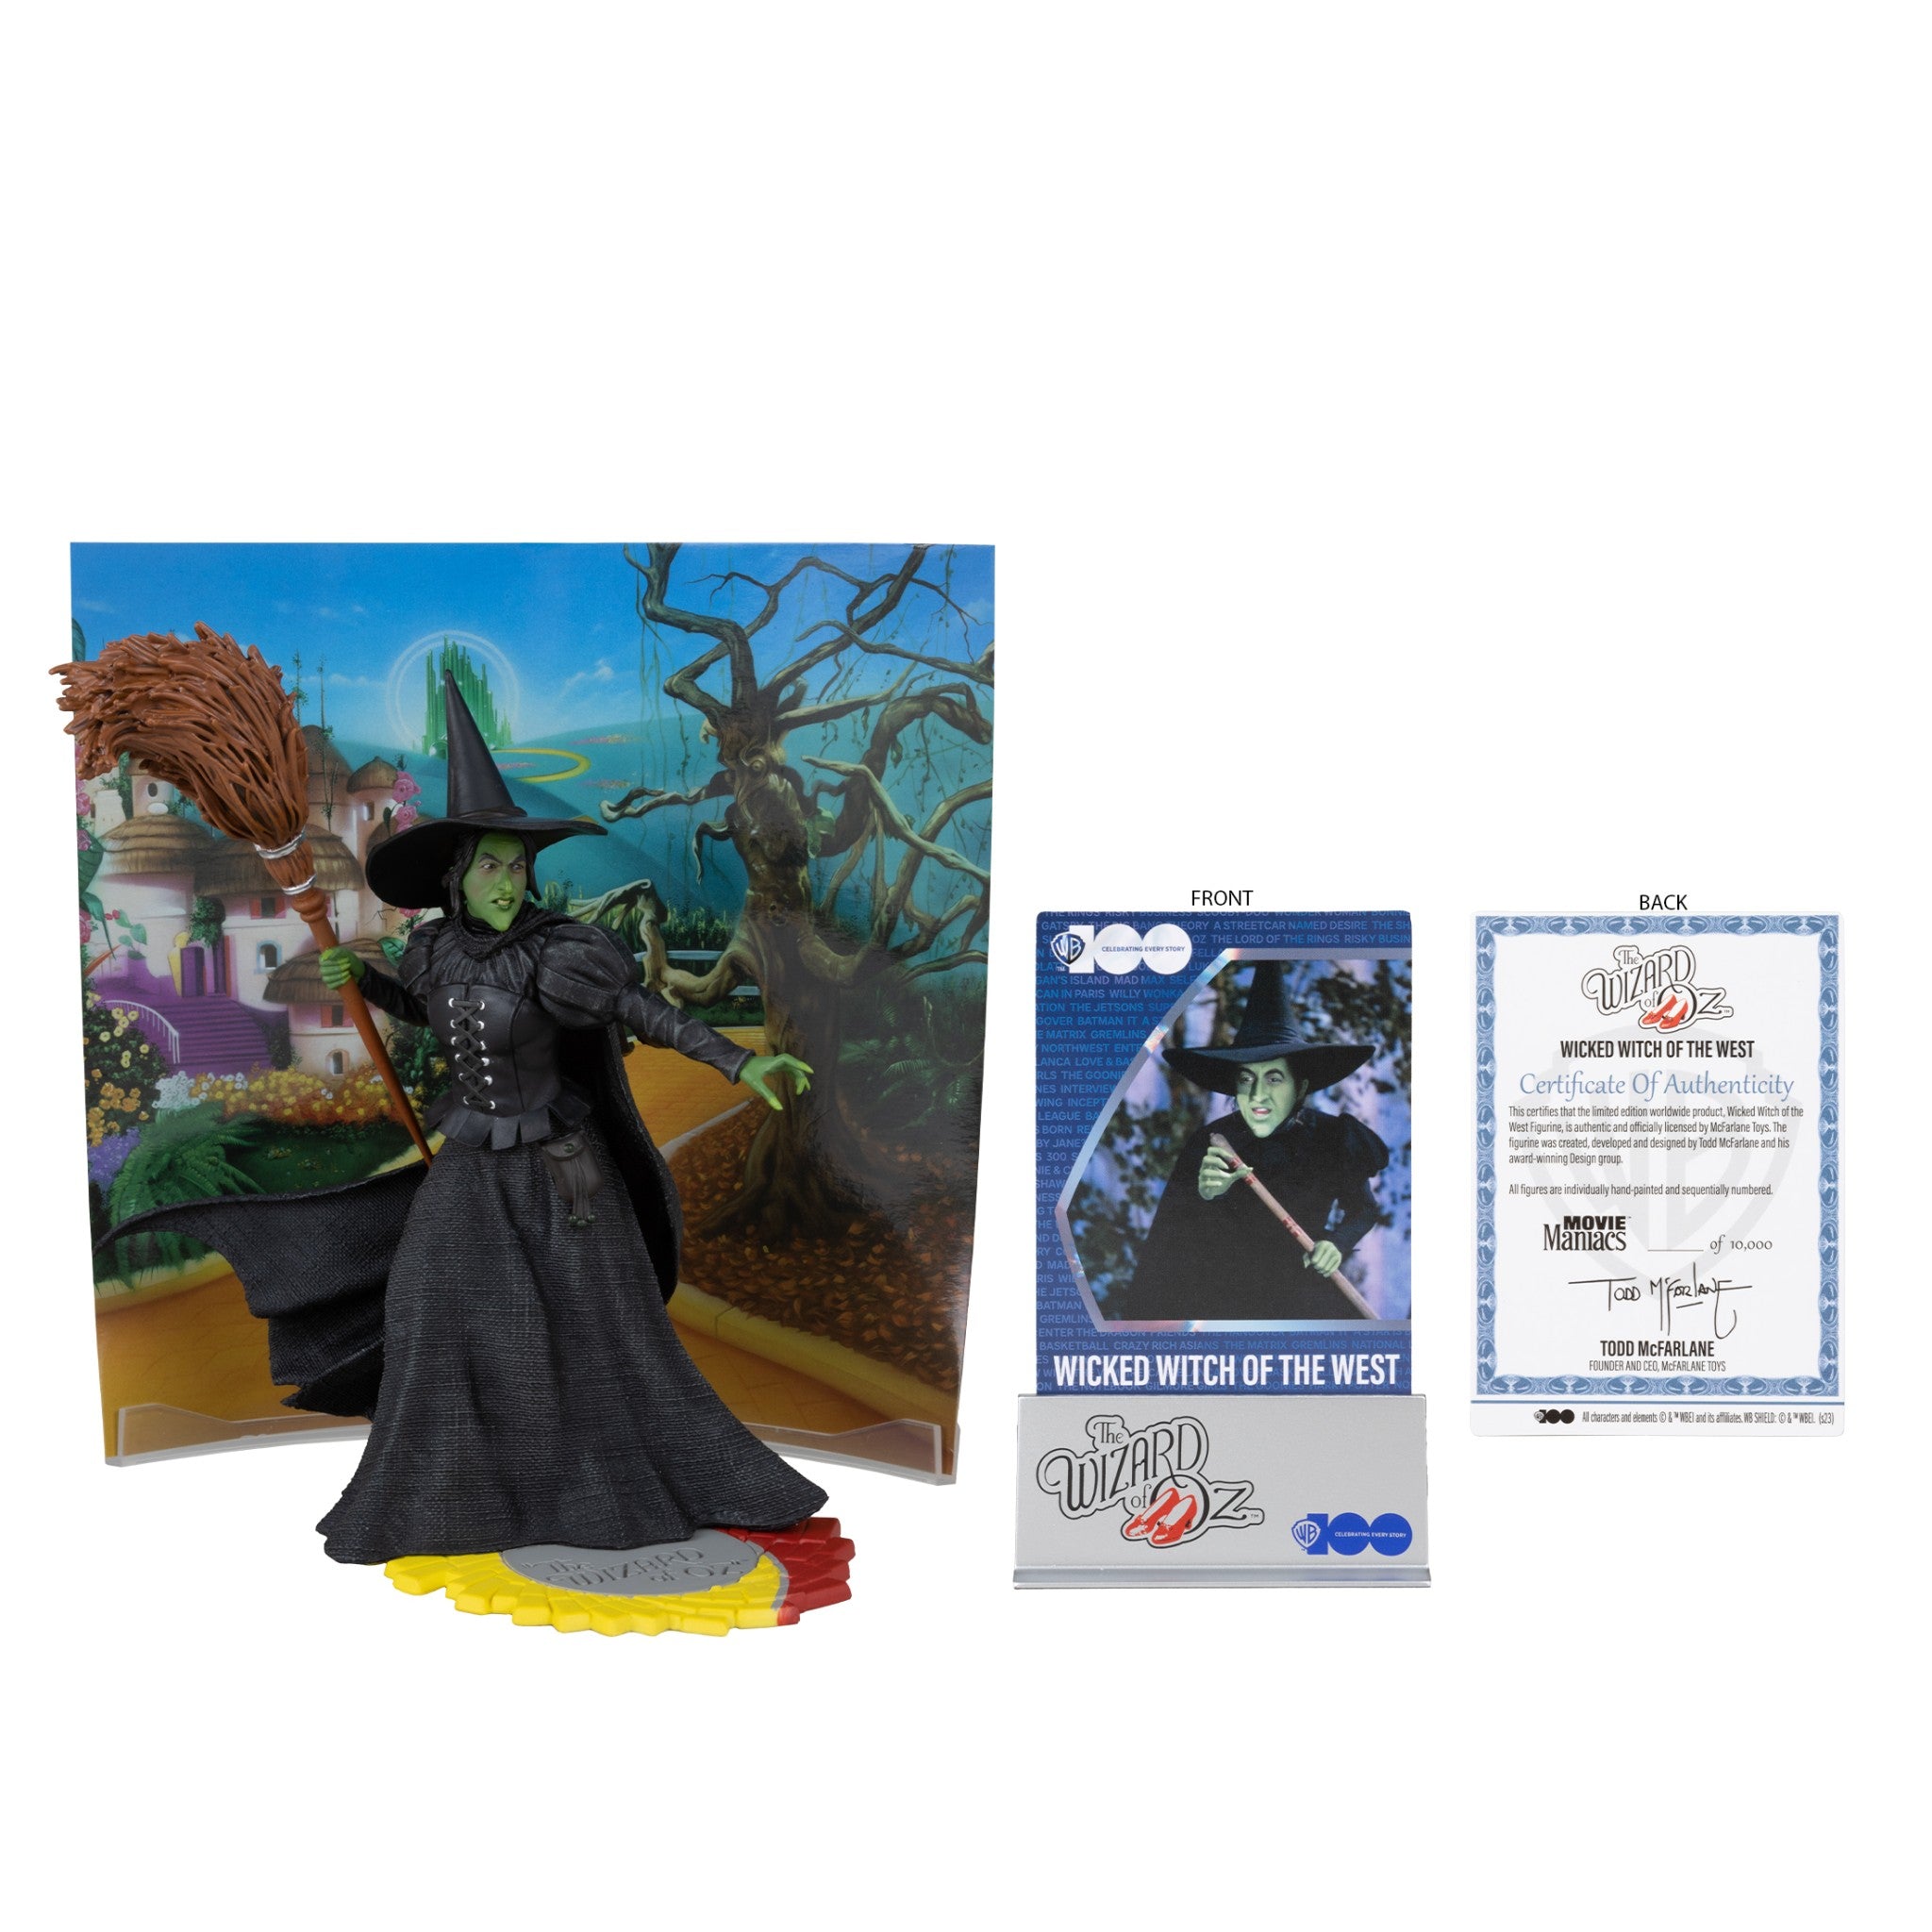 Movie Maniacs Wicked Witch of the West WB100 Anniversary 6" Limited - McFarlane - 0